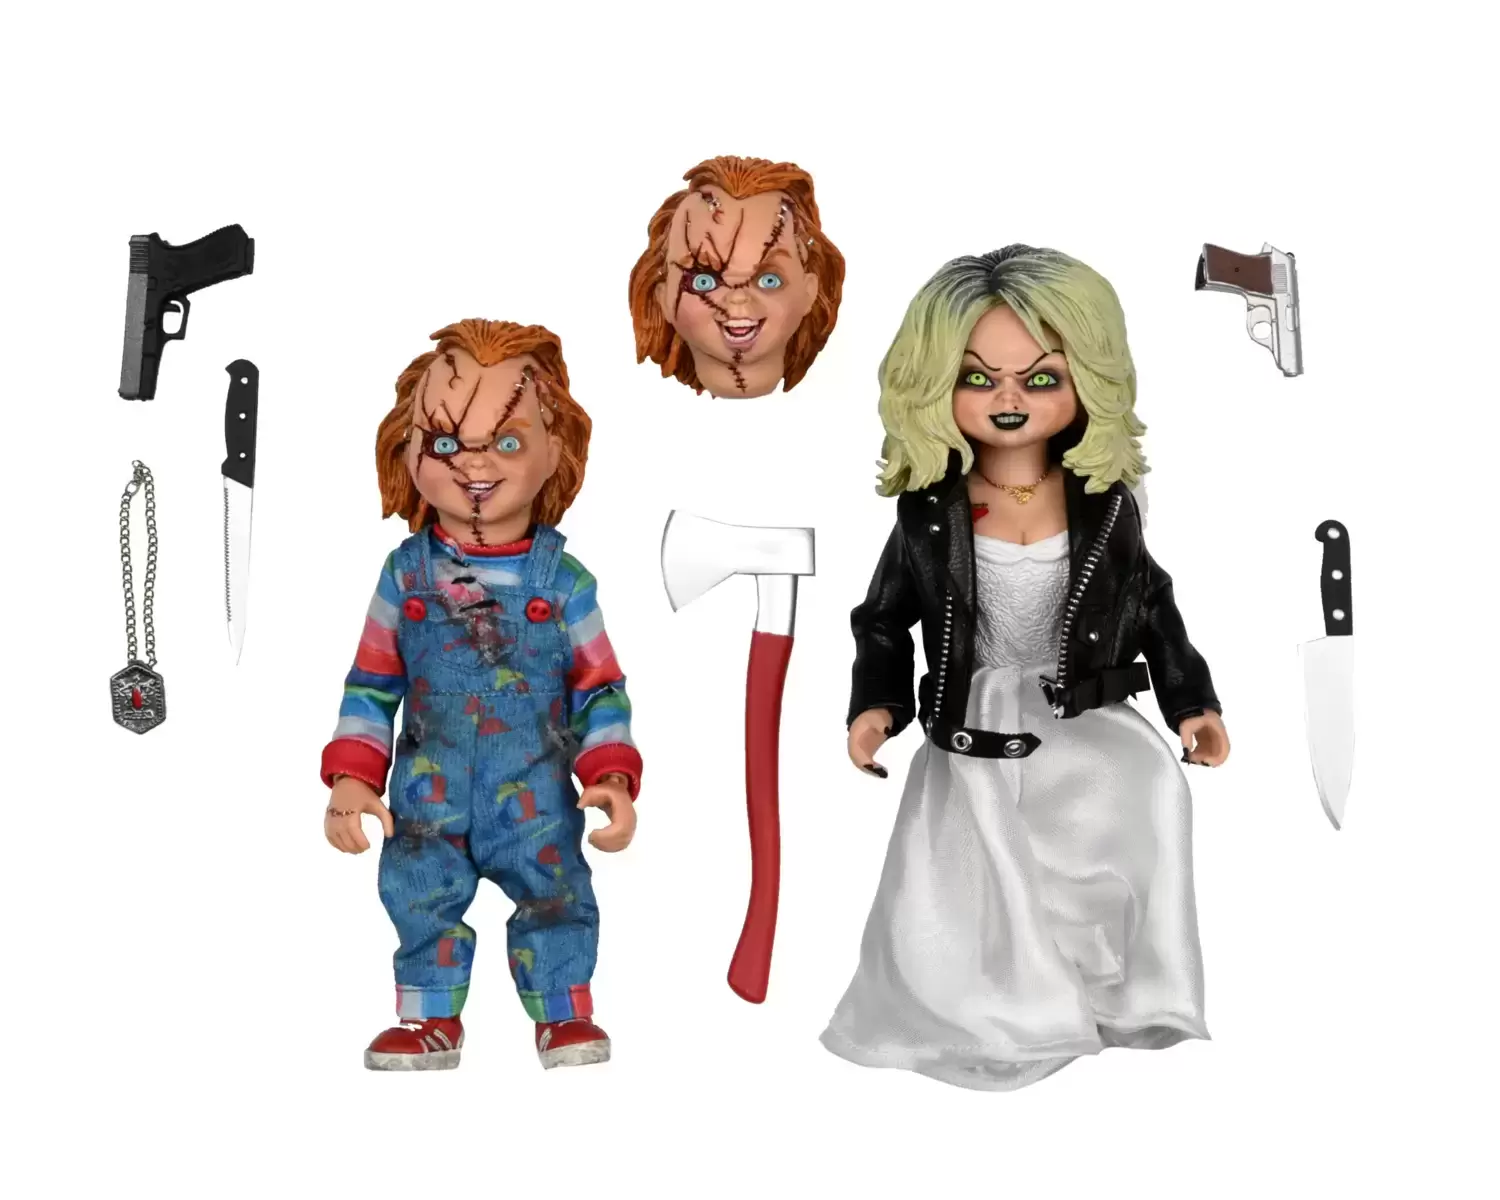 NECA - Bride of Chucky - Chucky and Tiffany 2-Pack Clothed